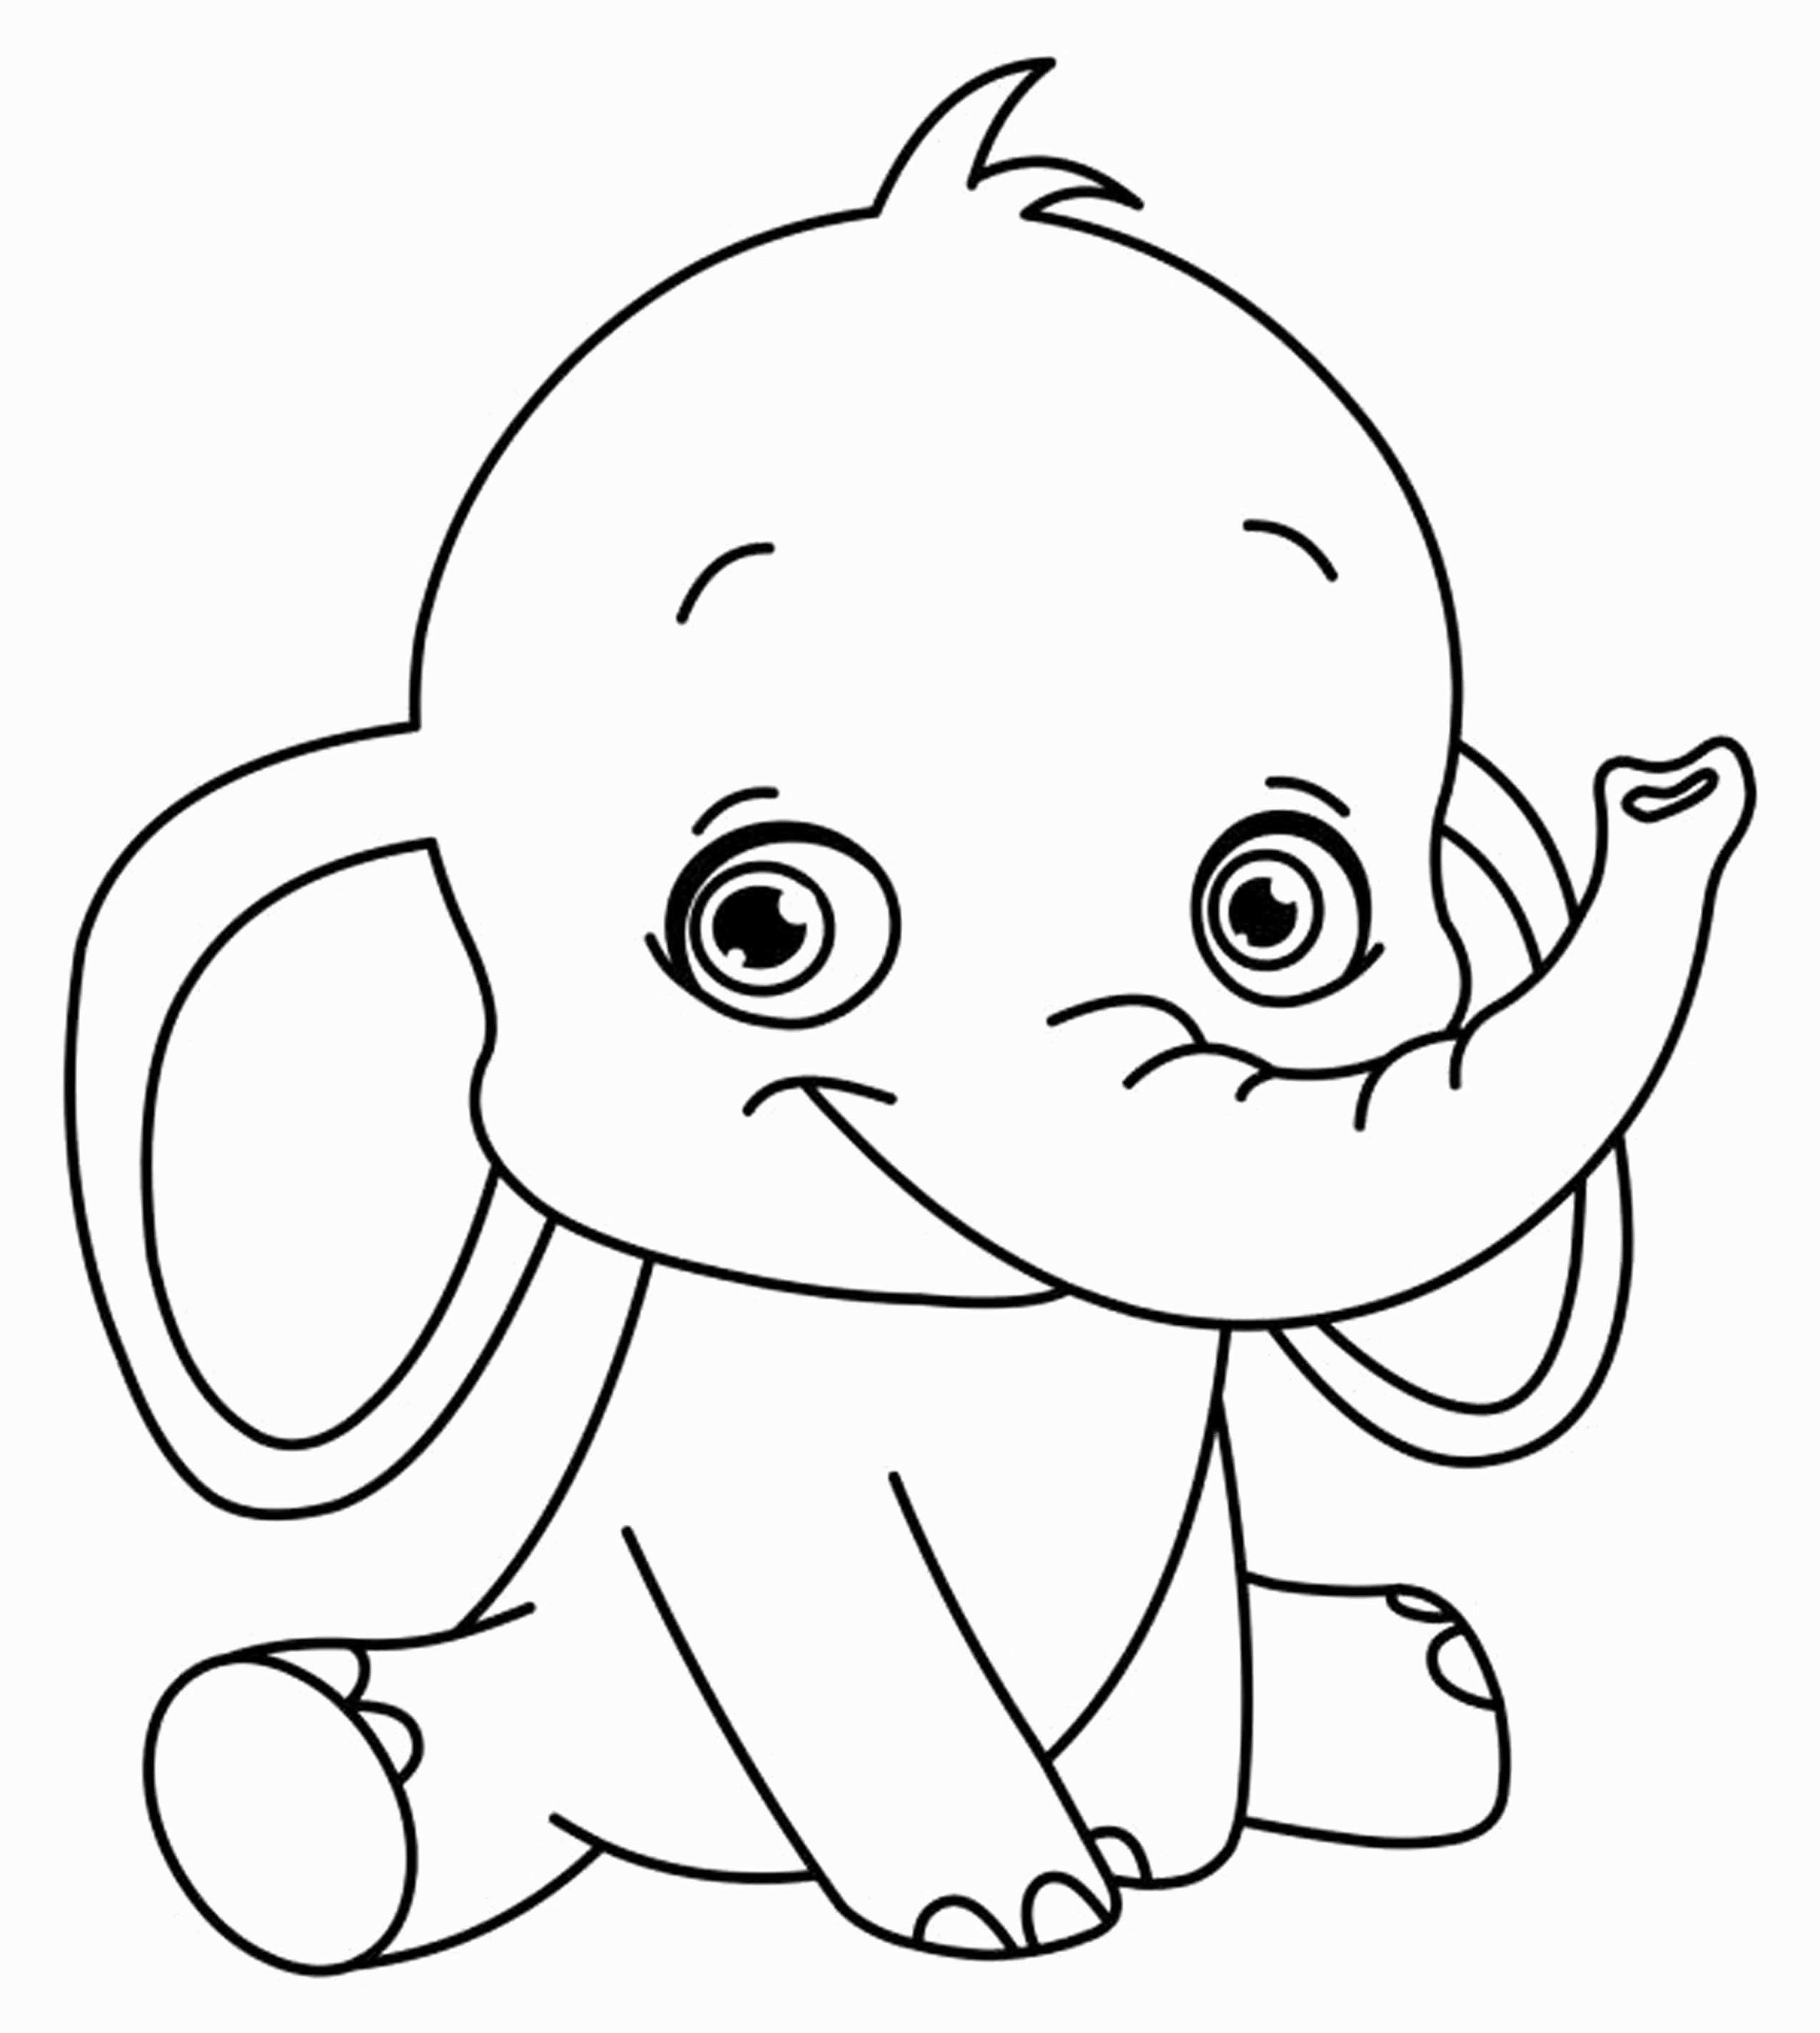 Coloring Pages For Girls Frozen Jacob And Esau Coloring Page Fresh Coloring Pages For Girls Frozen